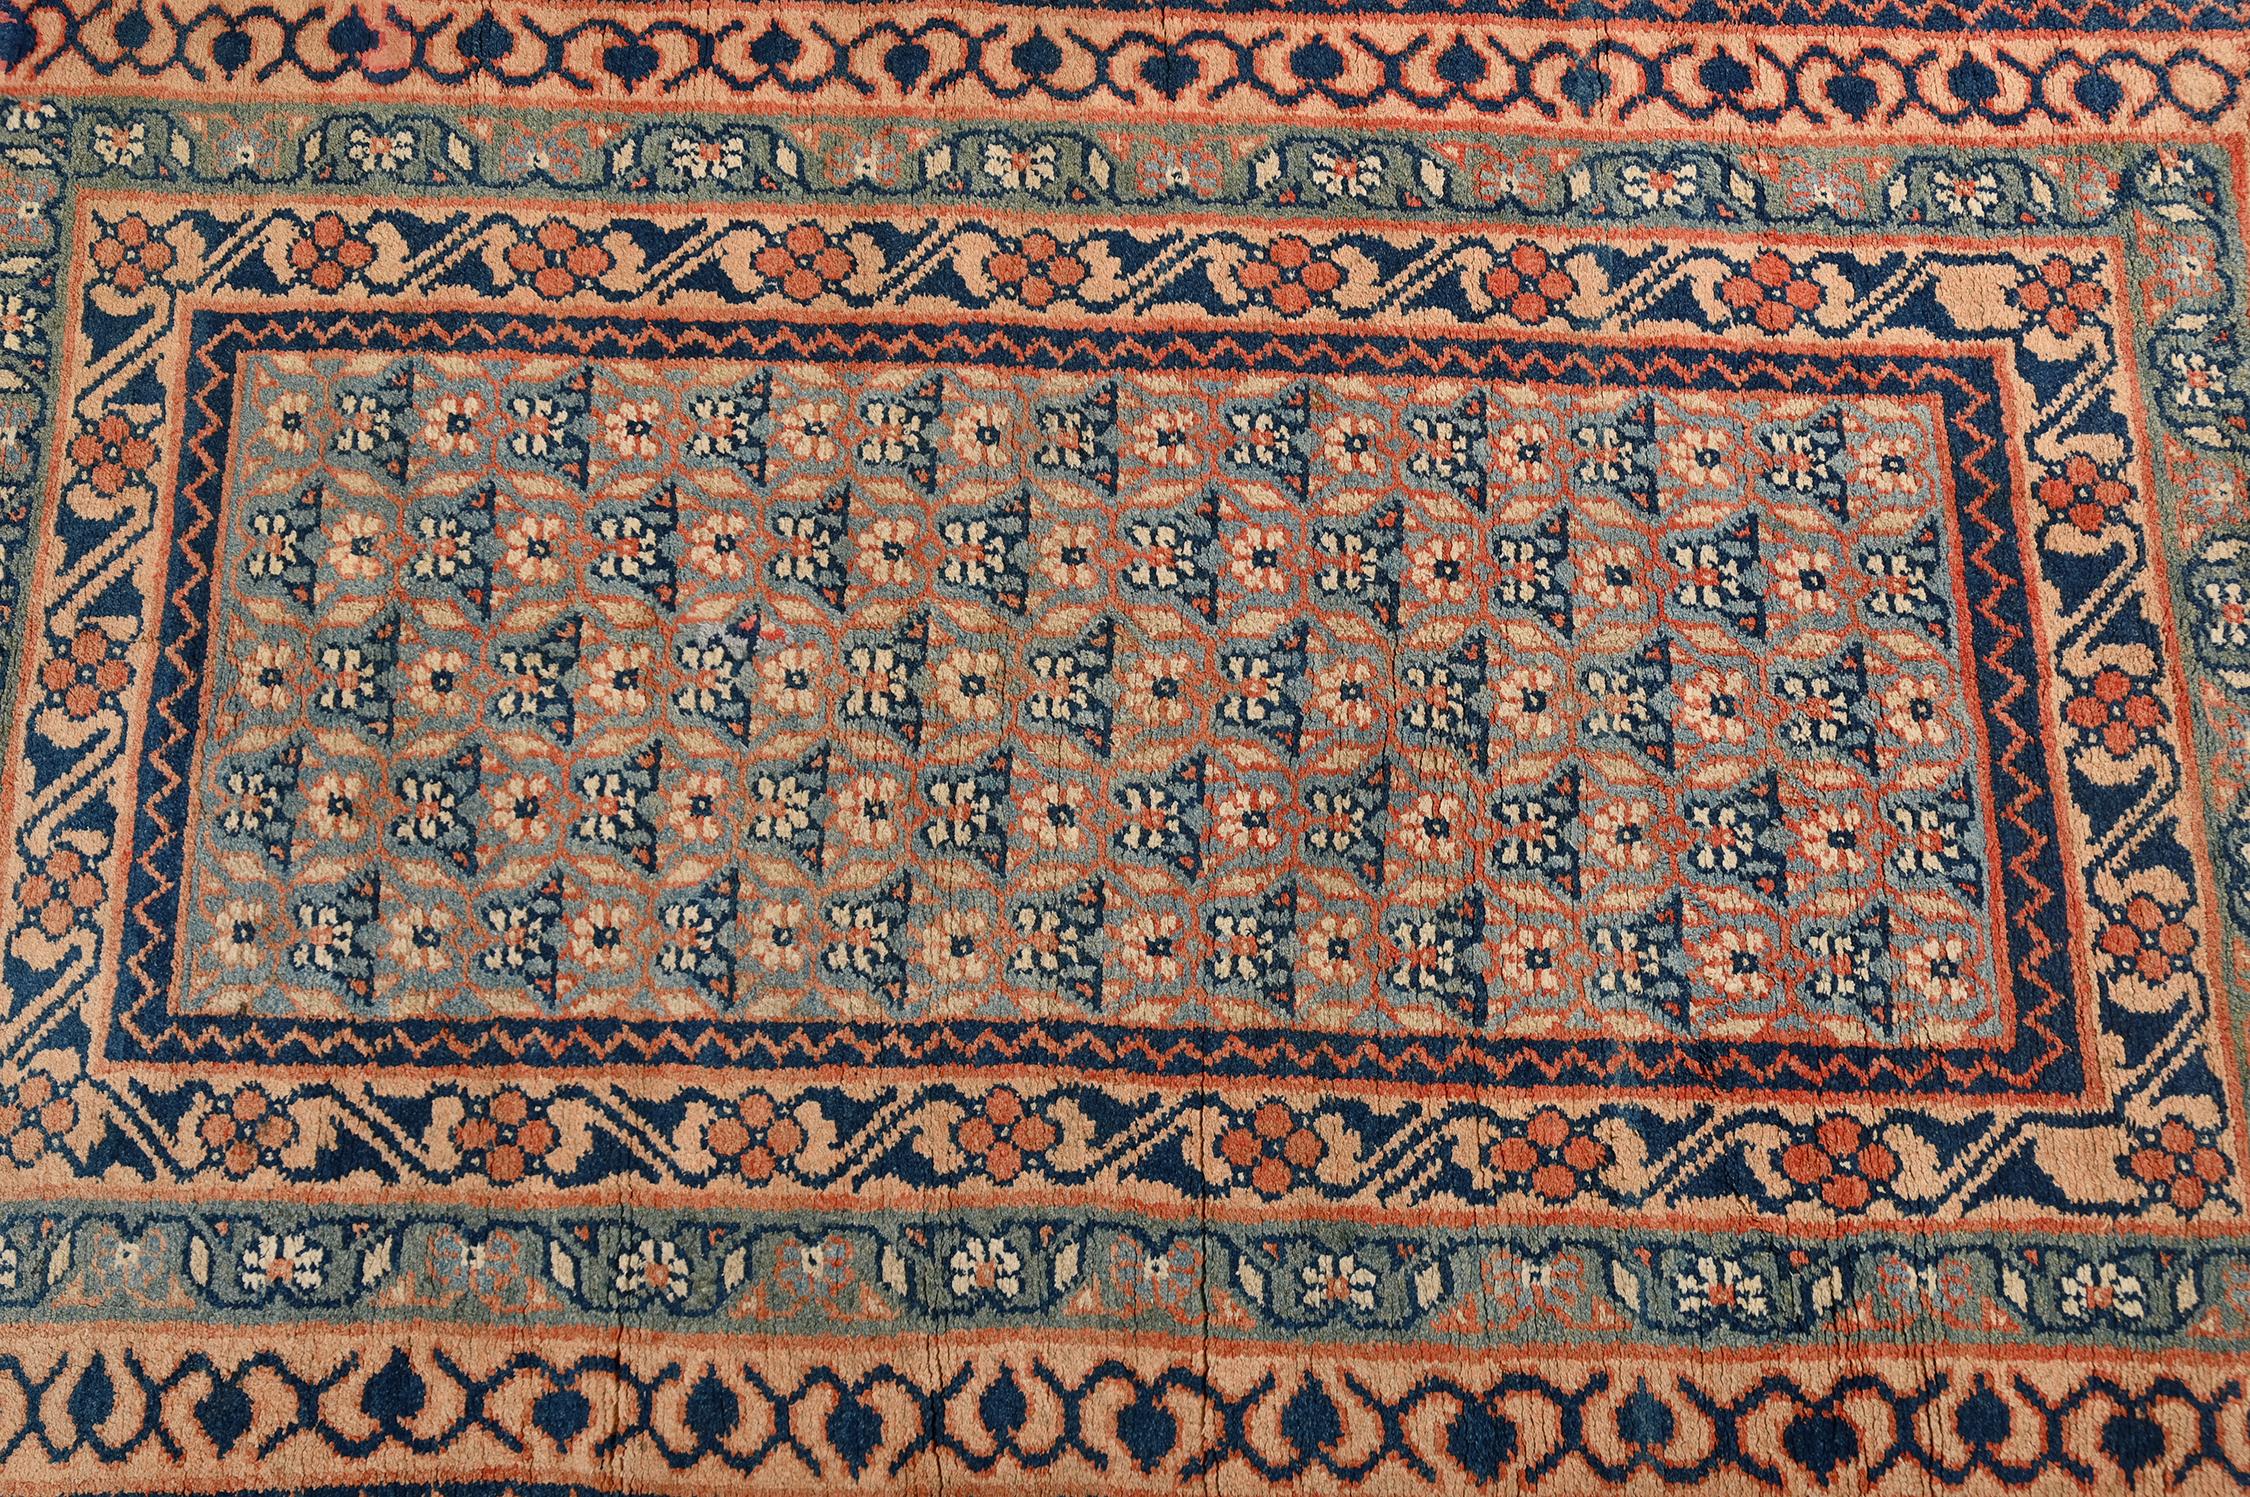 Vintage Dhurrie Flat Weave in Orange and Blue Floral Patterns by Rug & Kilim In Good Condition For Sale In Long Island City, NY